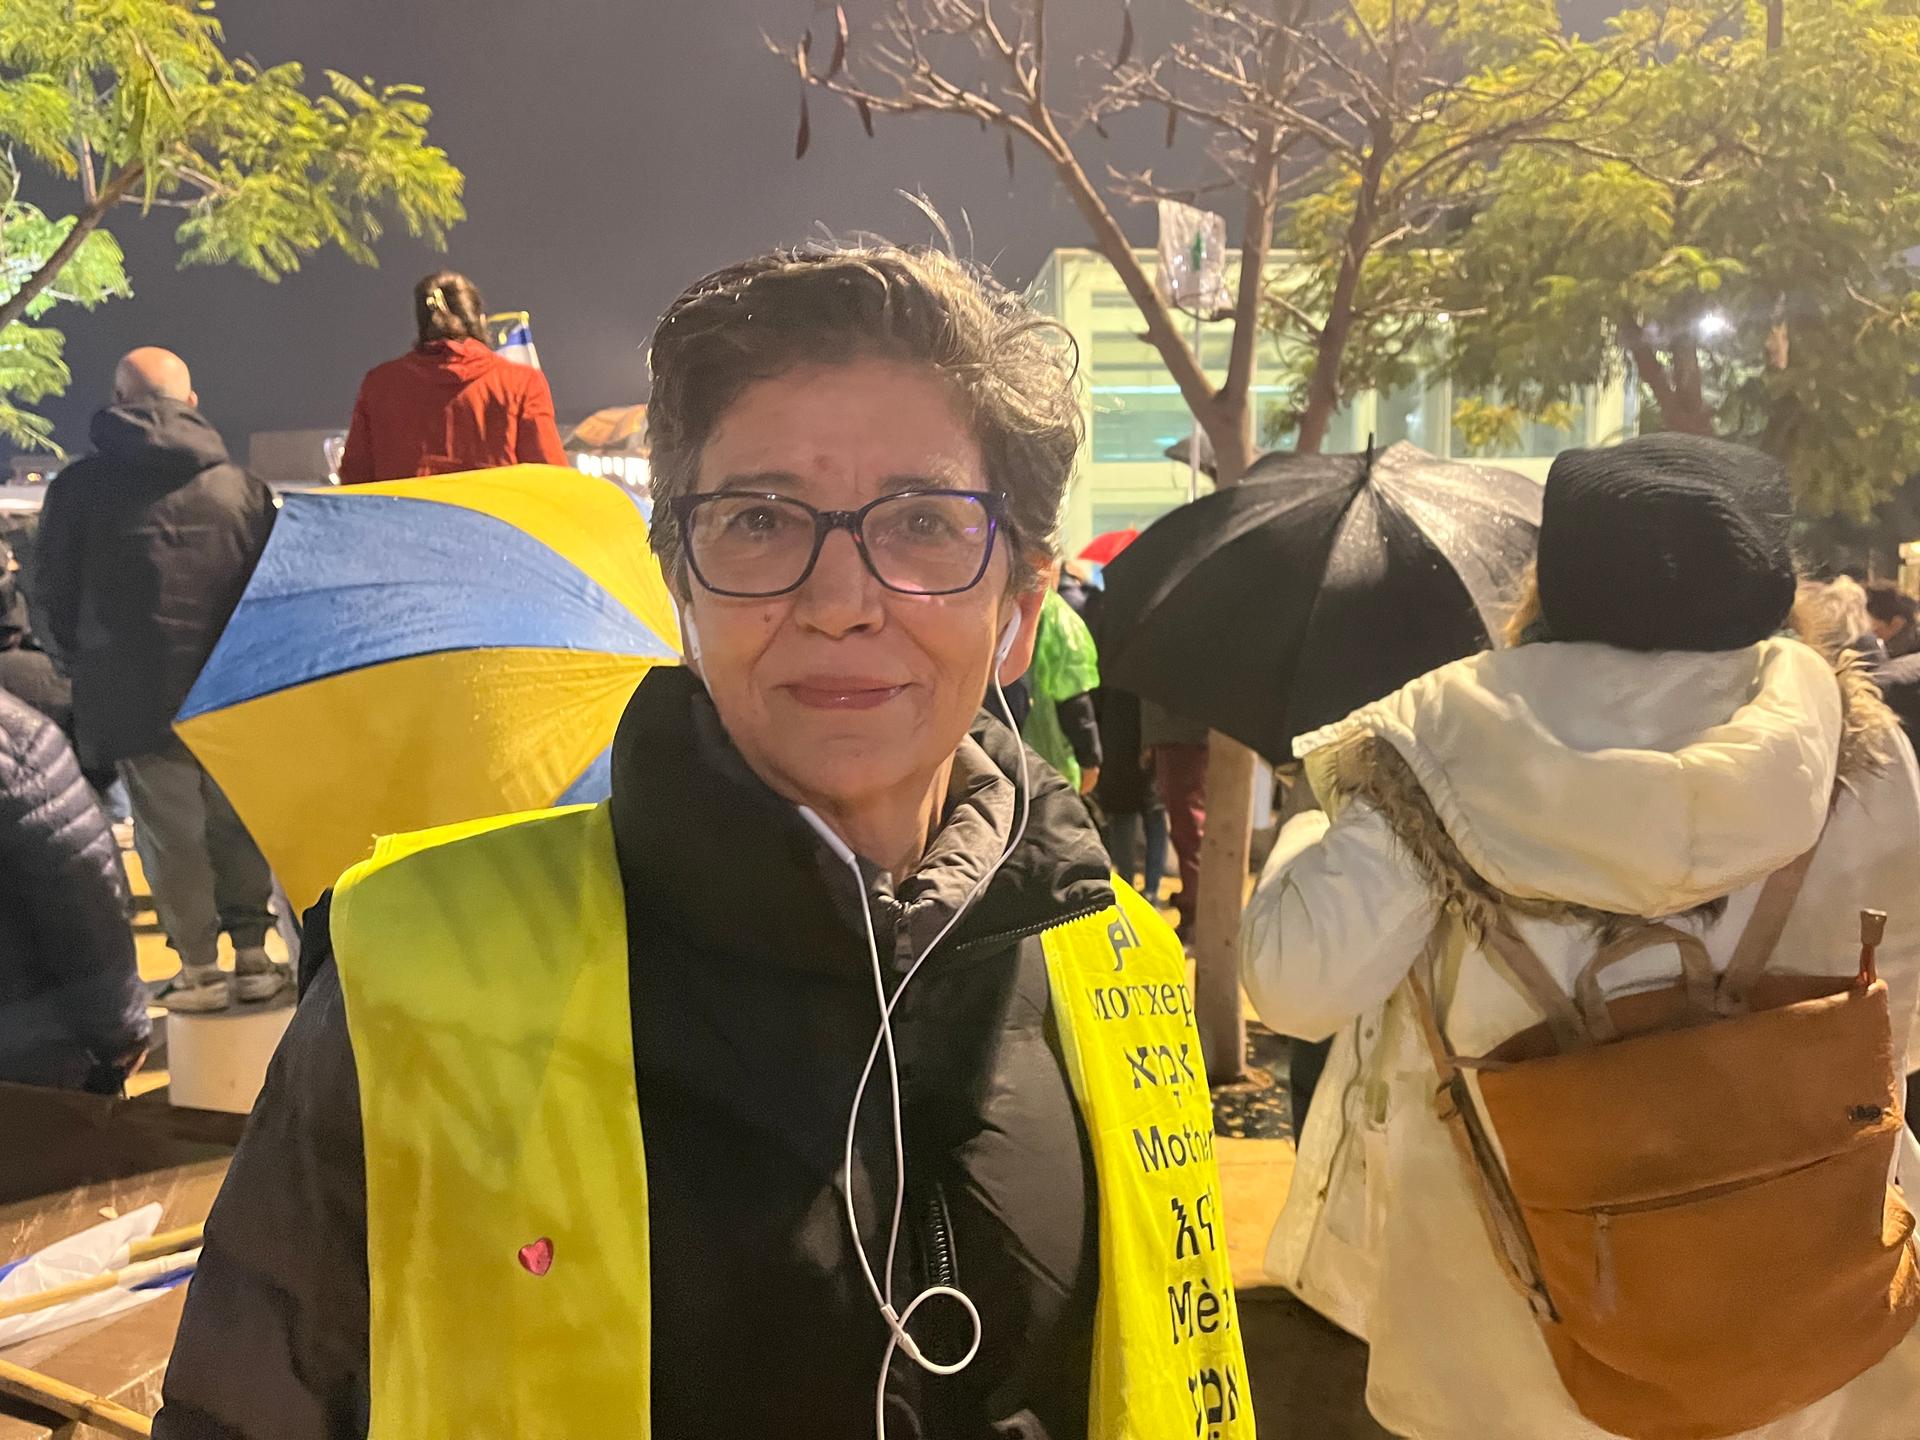 Woman wearing glass and yellow safety vest